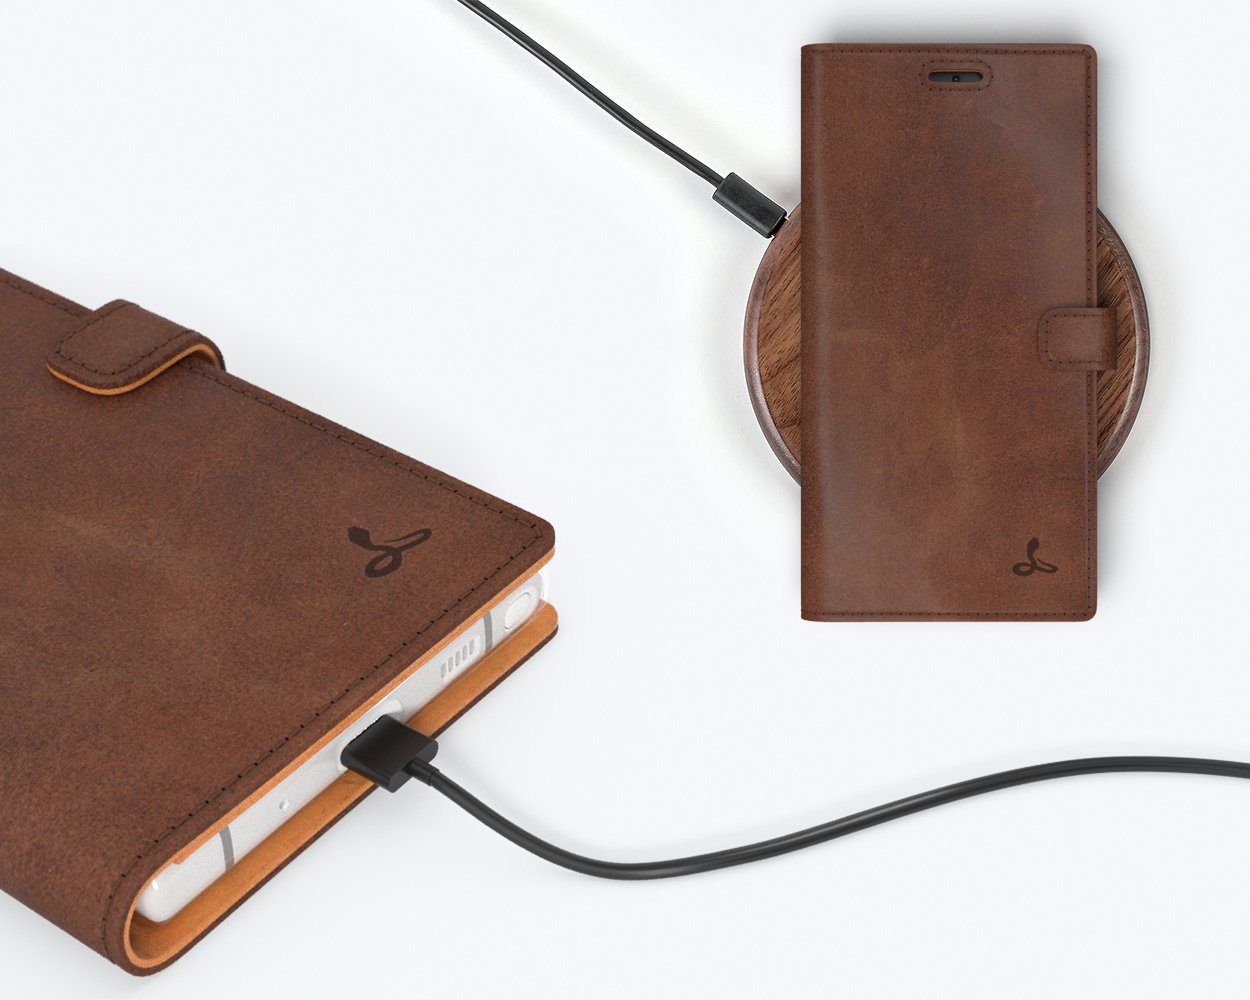 Vintage Leather Wallet - Samsung Galaxy Note 10 Plus